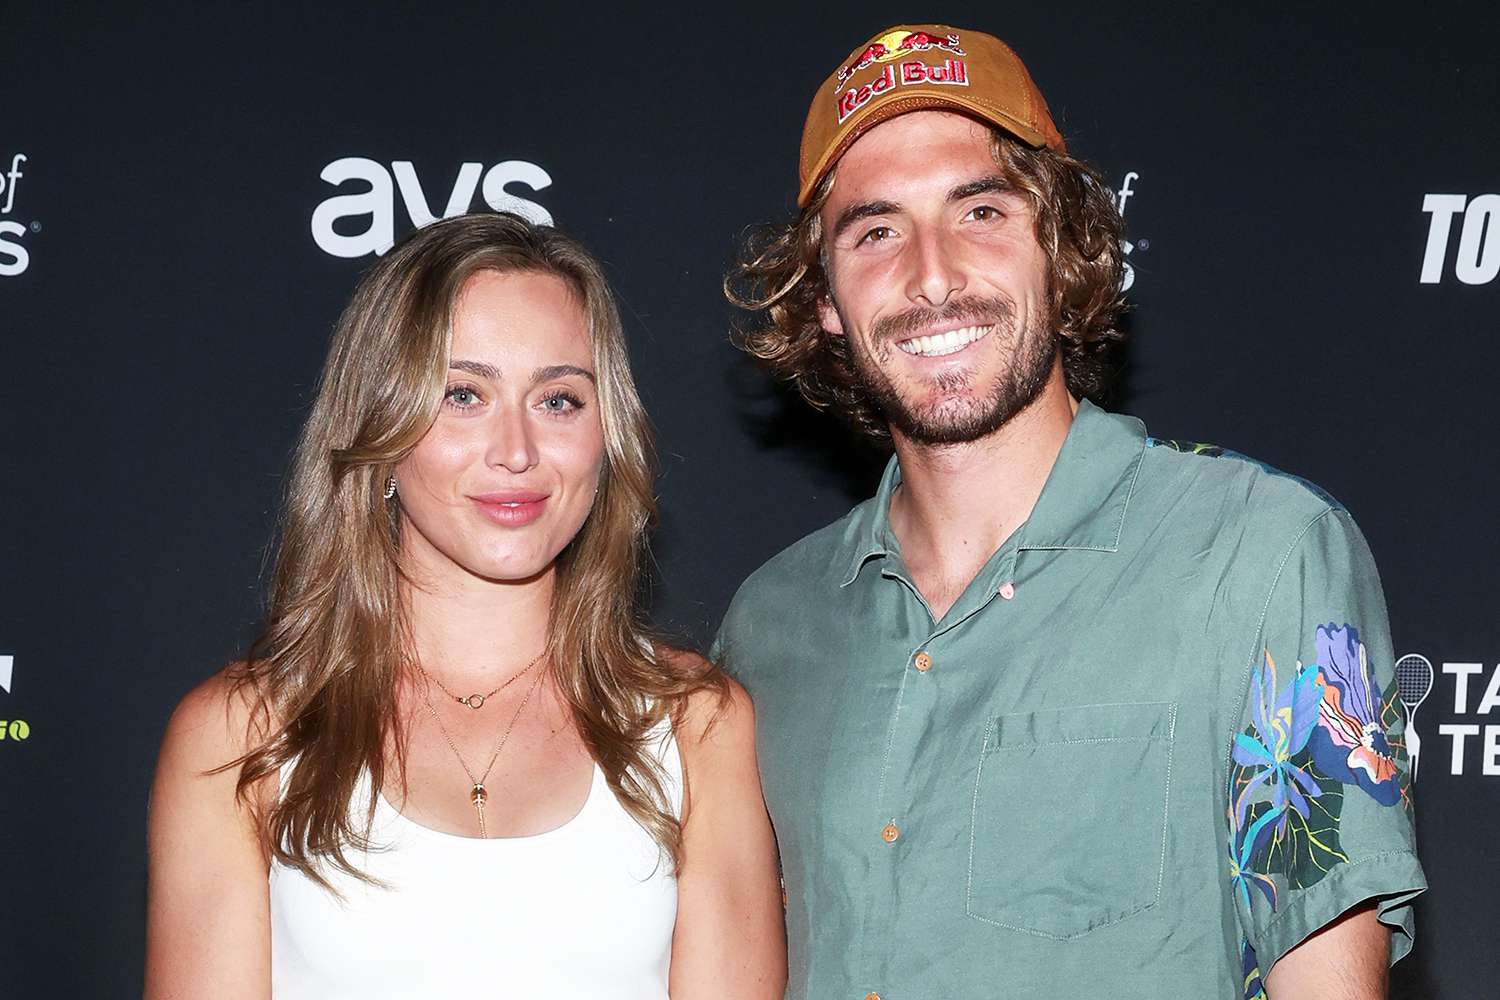 Tennis Star Couple Paula Badosa and Stefanos Tsitsipas Split After 1 Year: 'It's Not Easy'